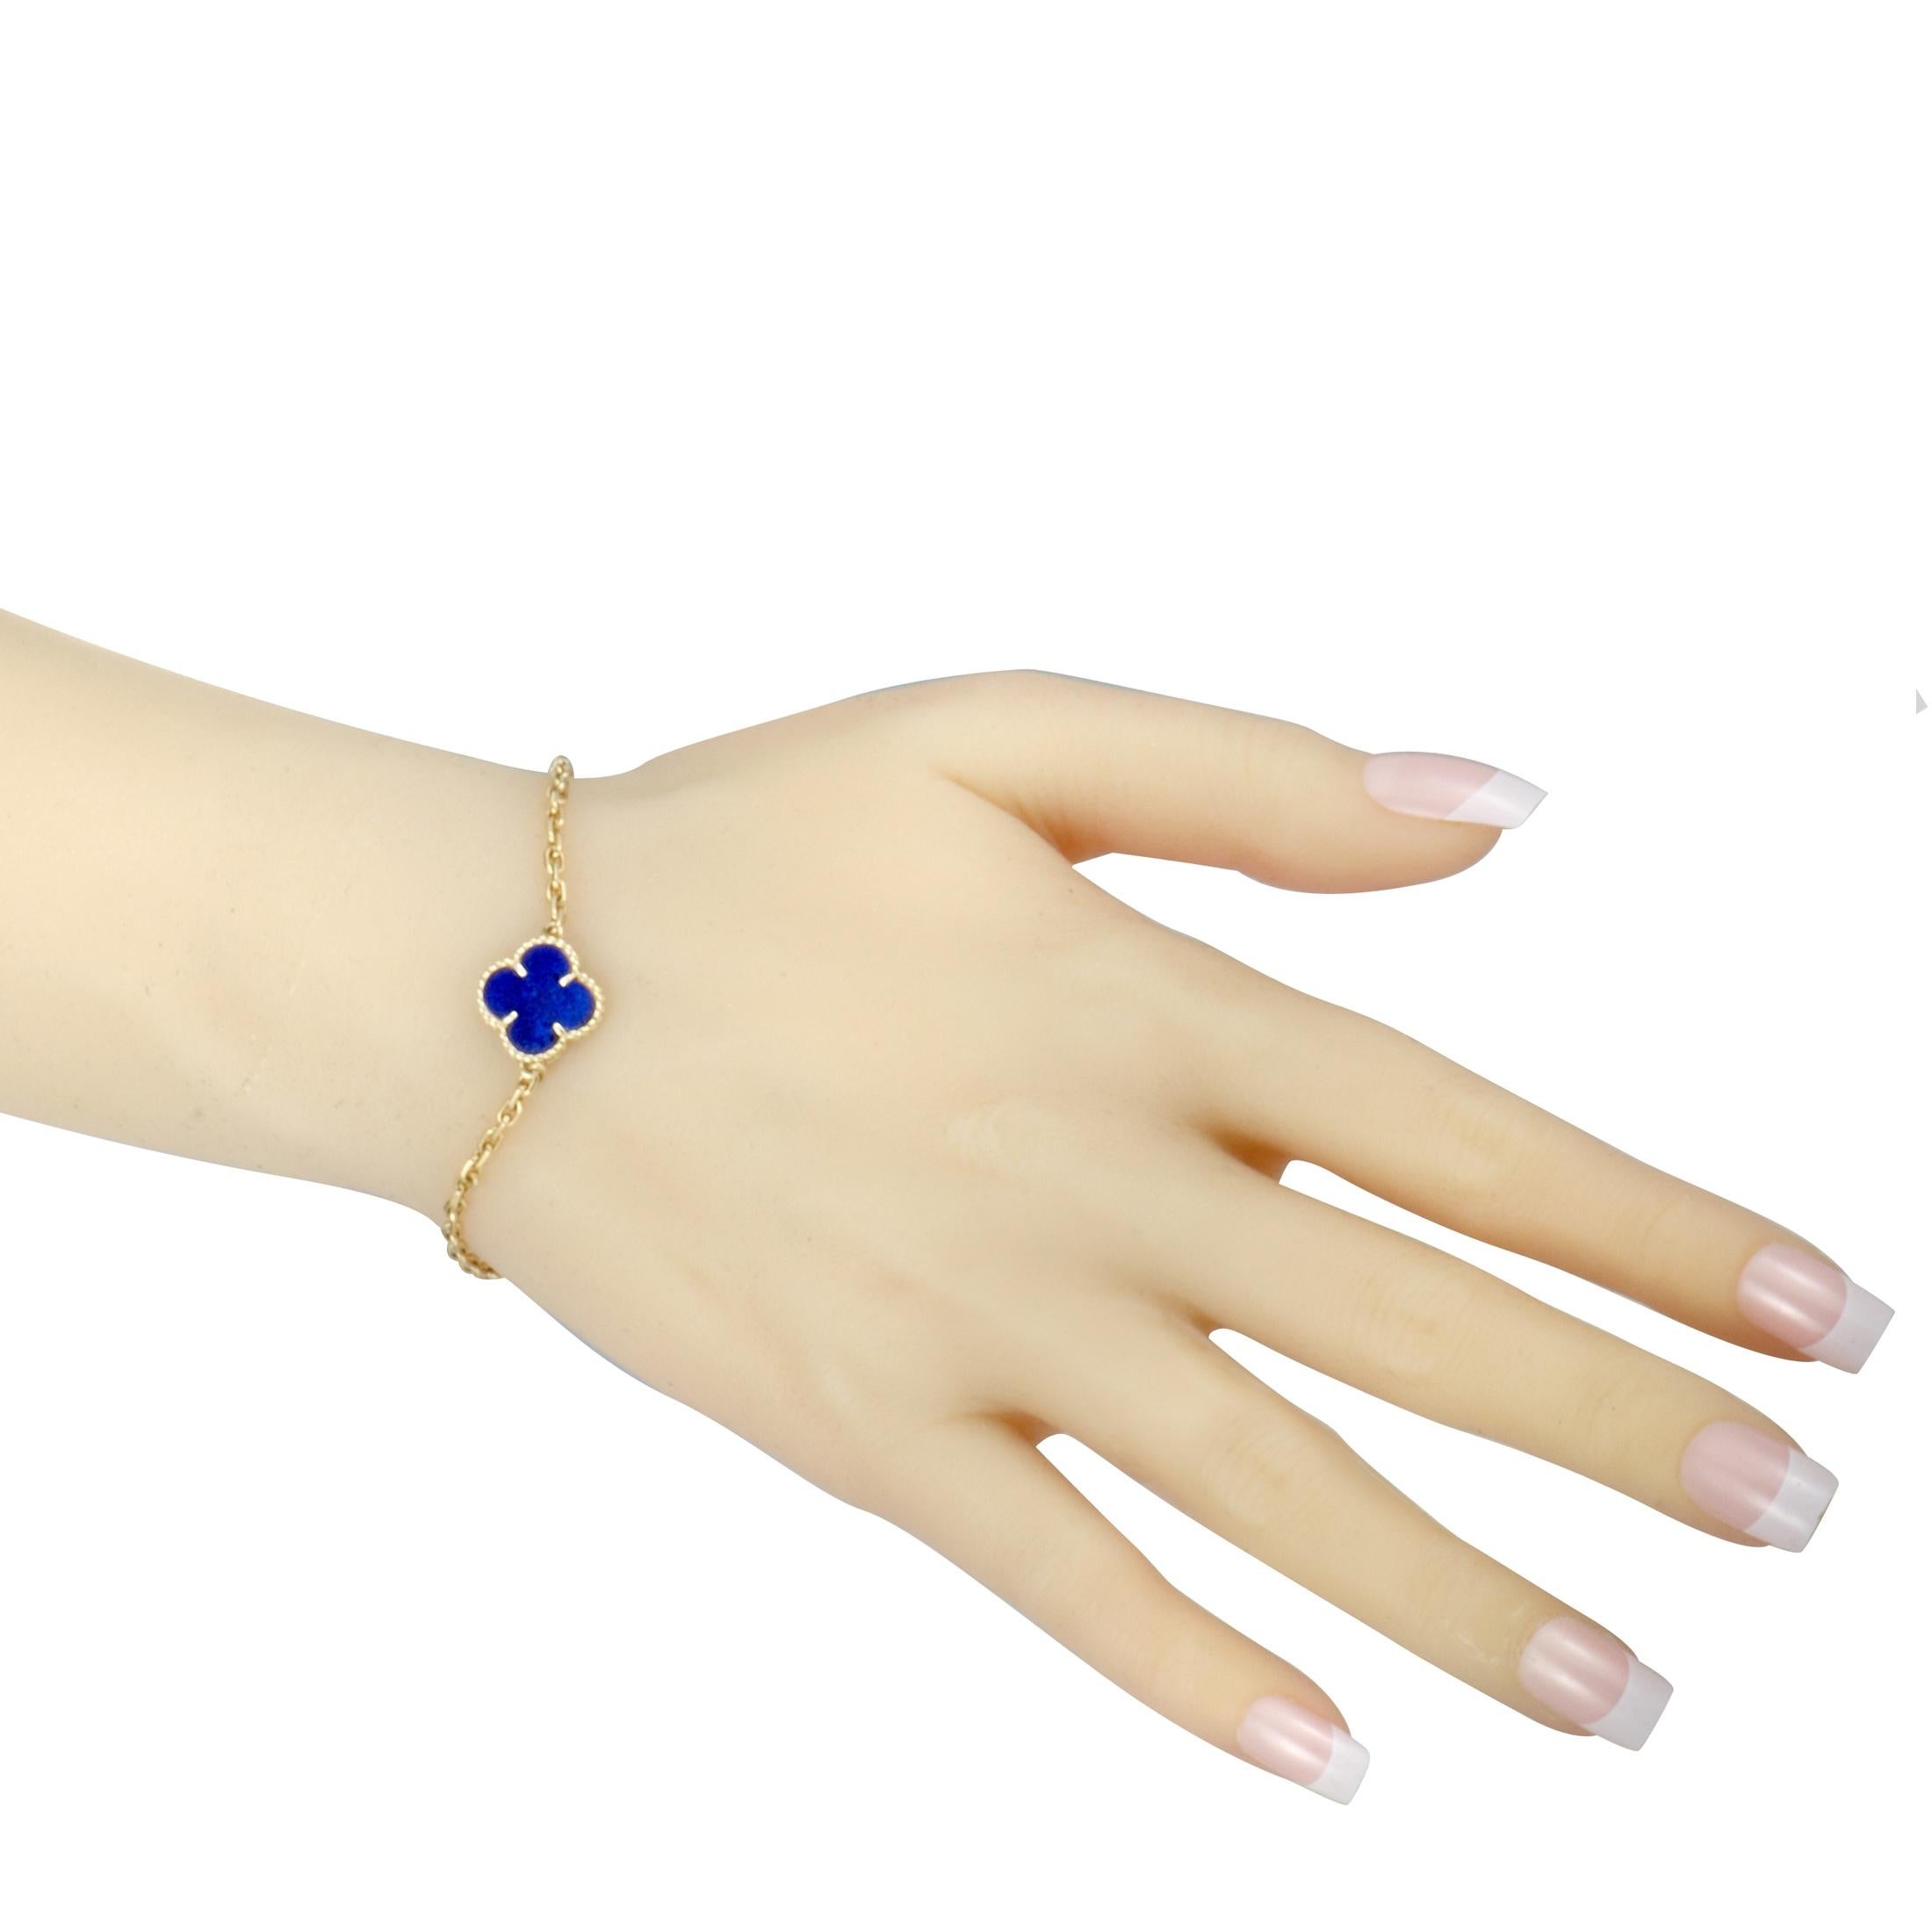 An extremely rare piece from the fascinating “Vintage Alhambra” collection by Van Cleef & Arpels, this wonderful bracelet boasts an exceptionally elegant design that is accentuated by an enticing lapis lazuli. The bracelet is made of attractive 18K